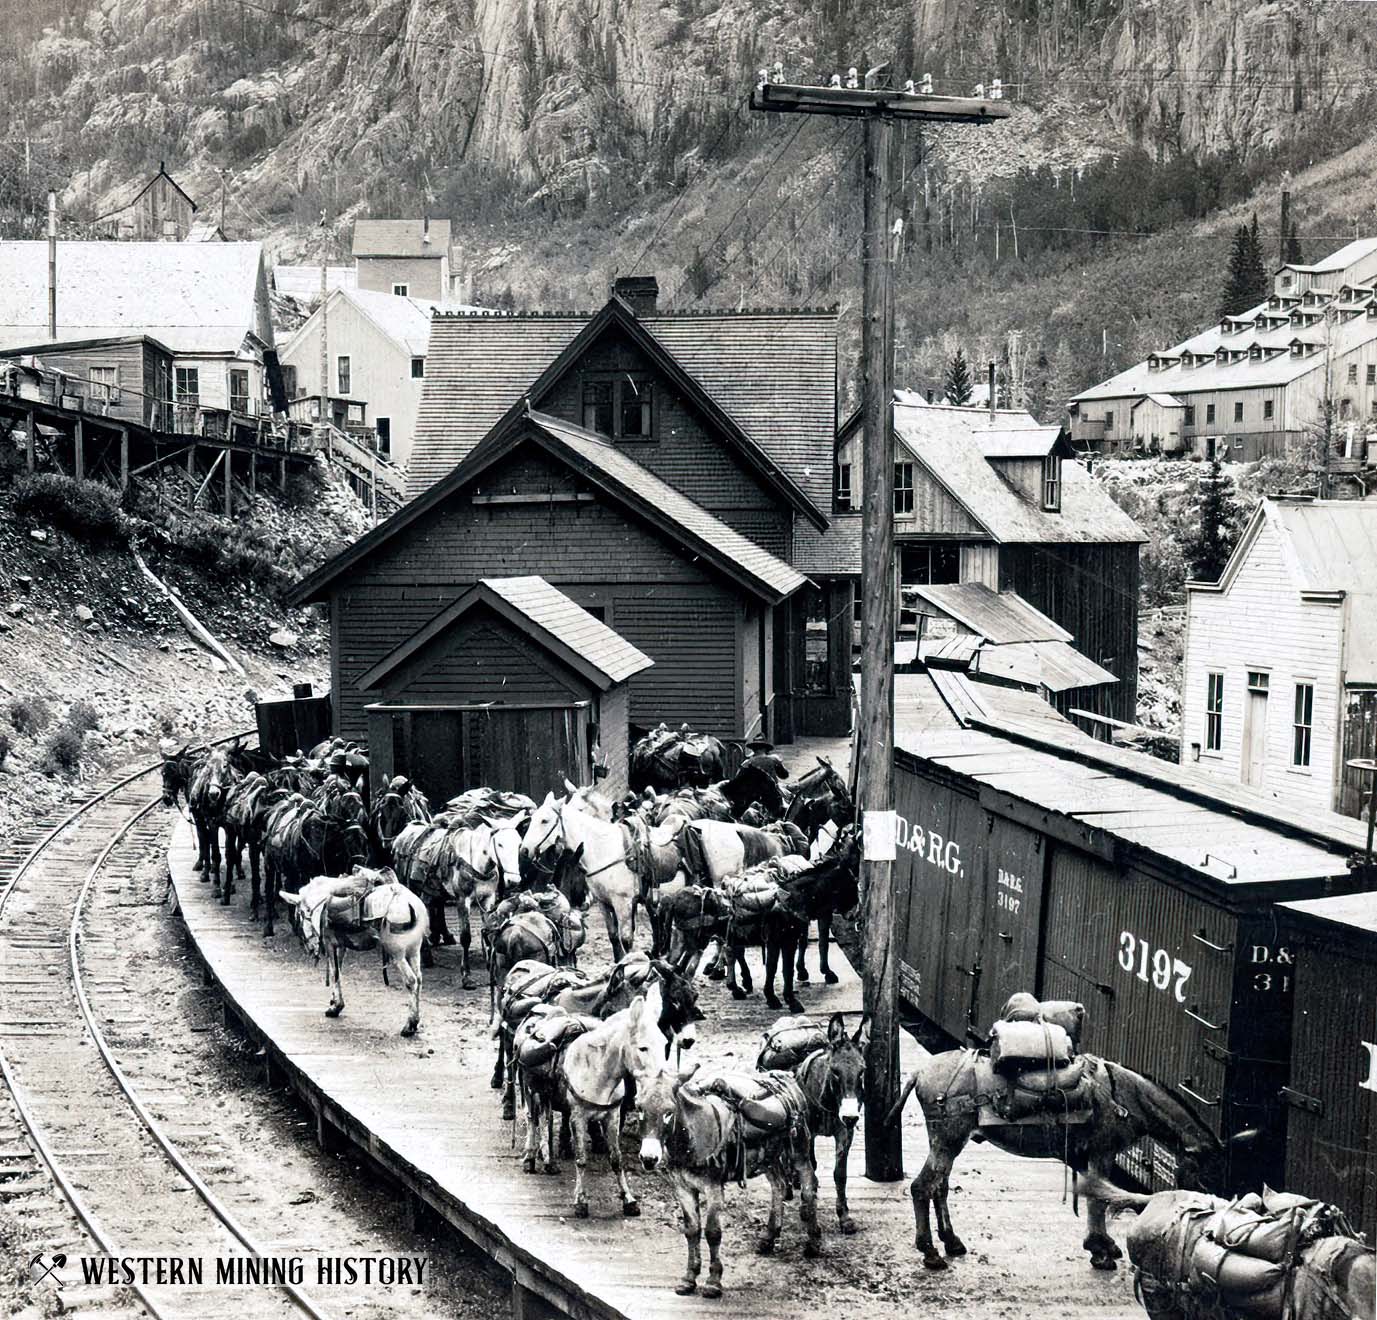 Transferring ore concentrates from mule team to railroad in Ophir, Colorado 1906